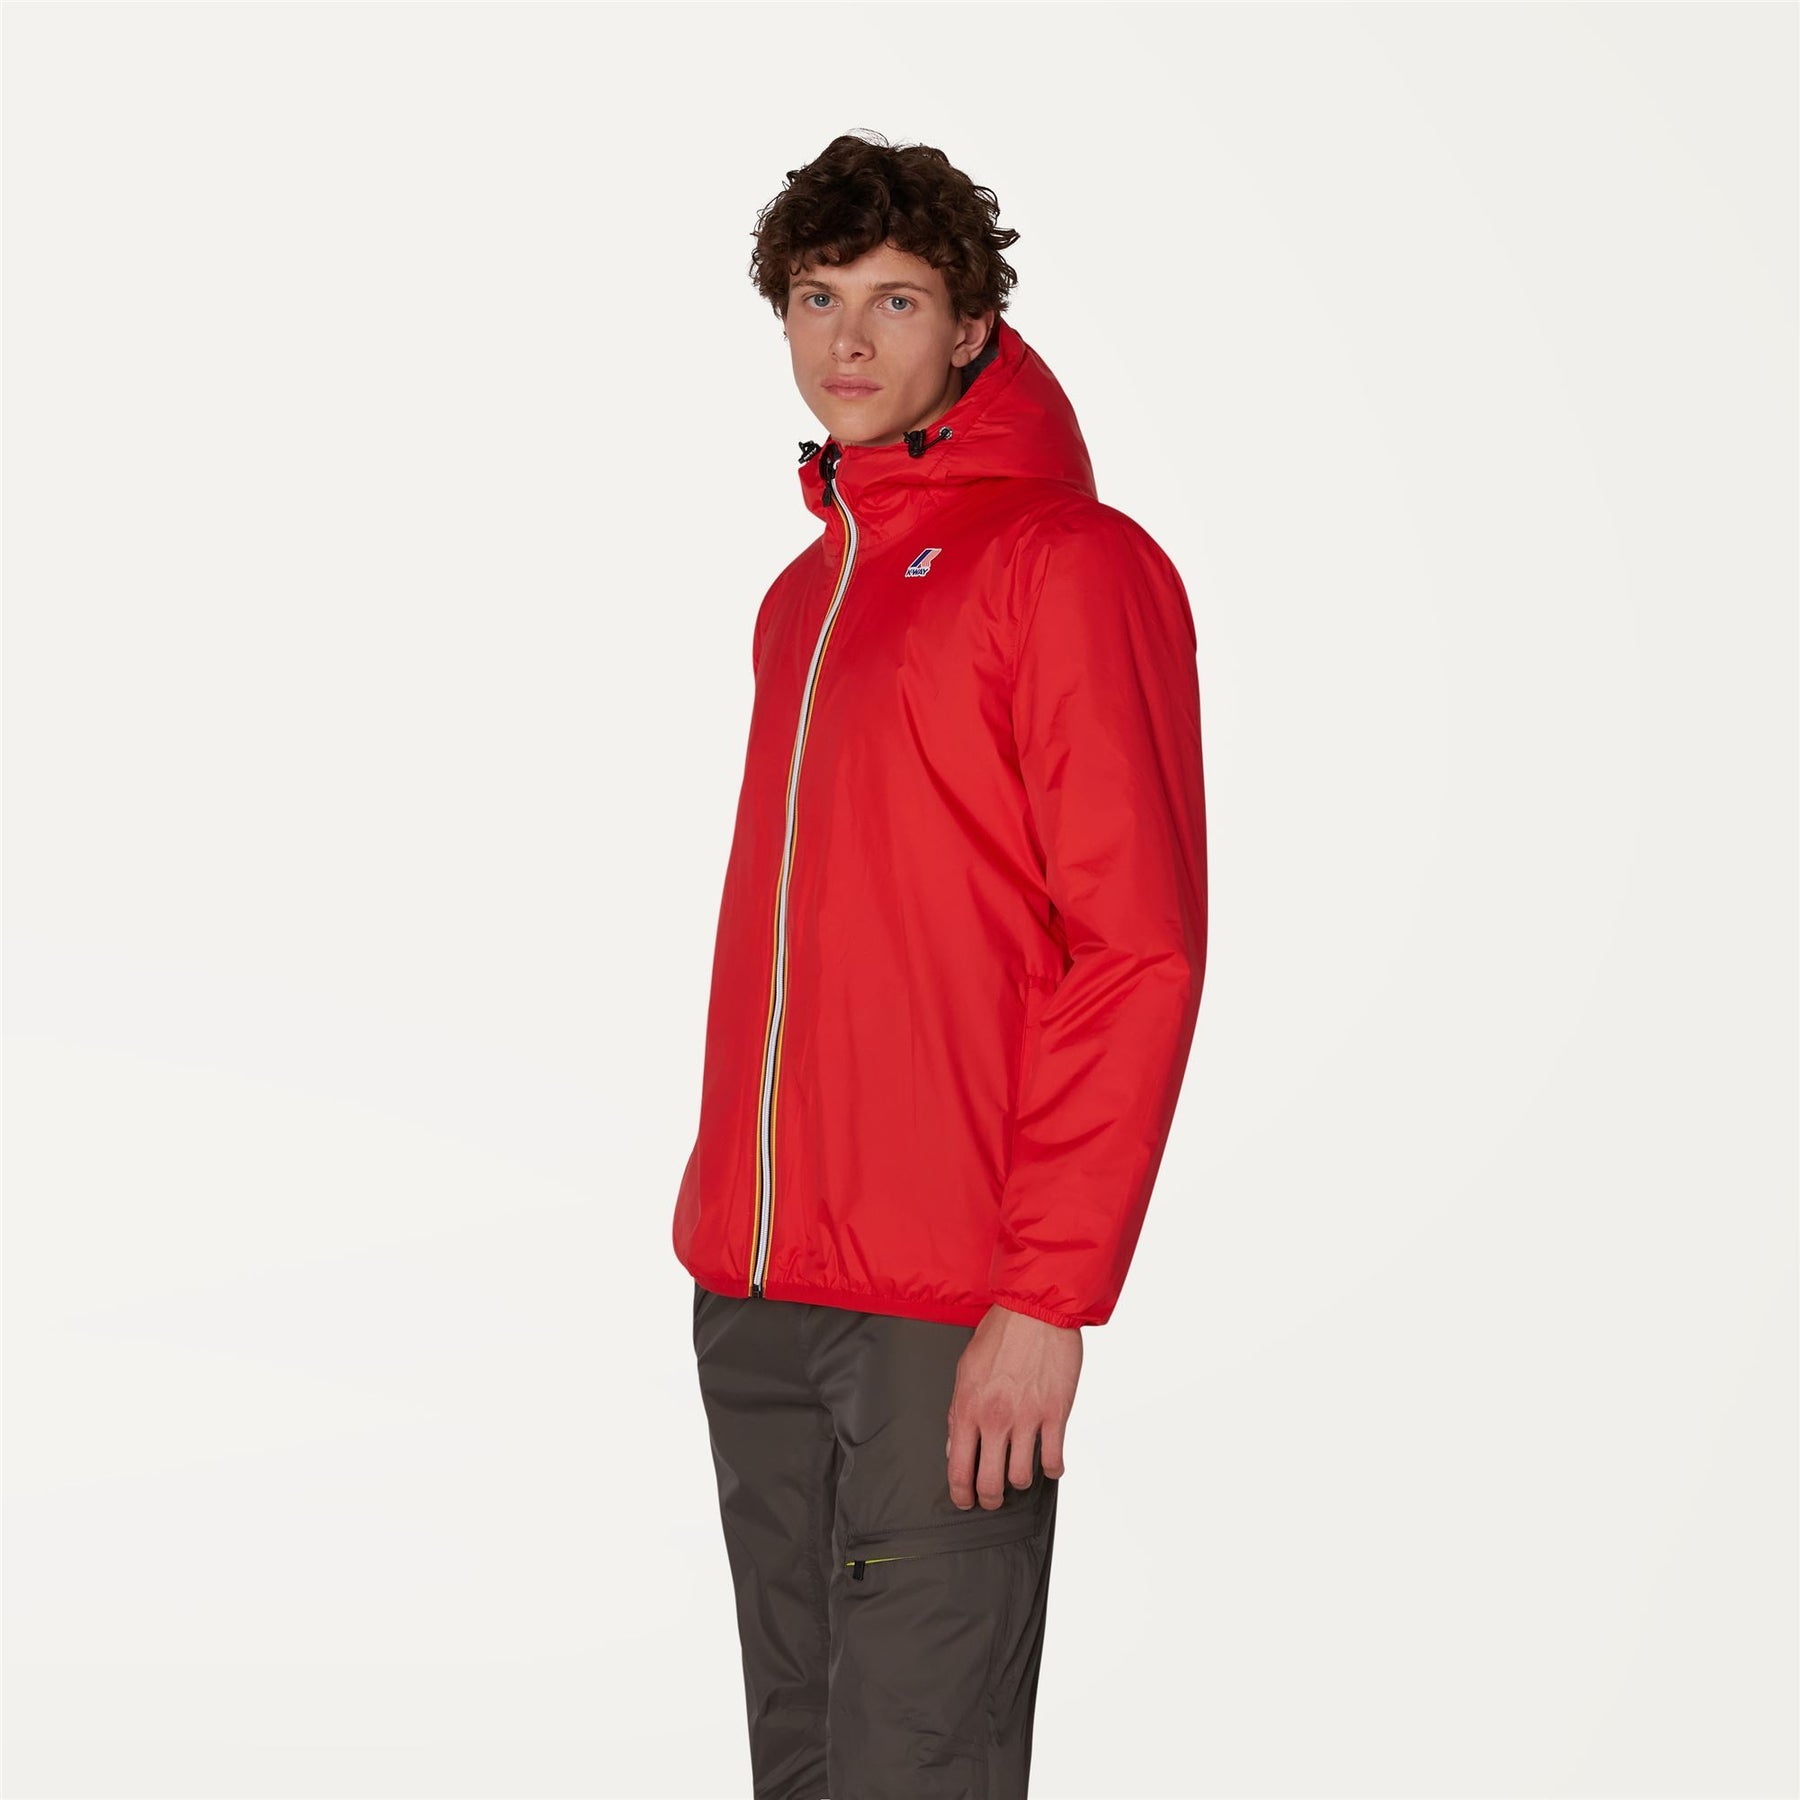 Claude Orsetto - Unisex Lined Full Zip Rain Jacket in Red